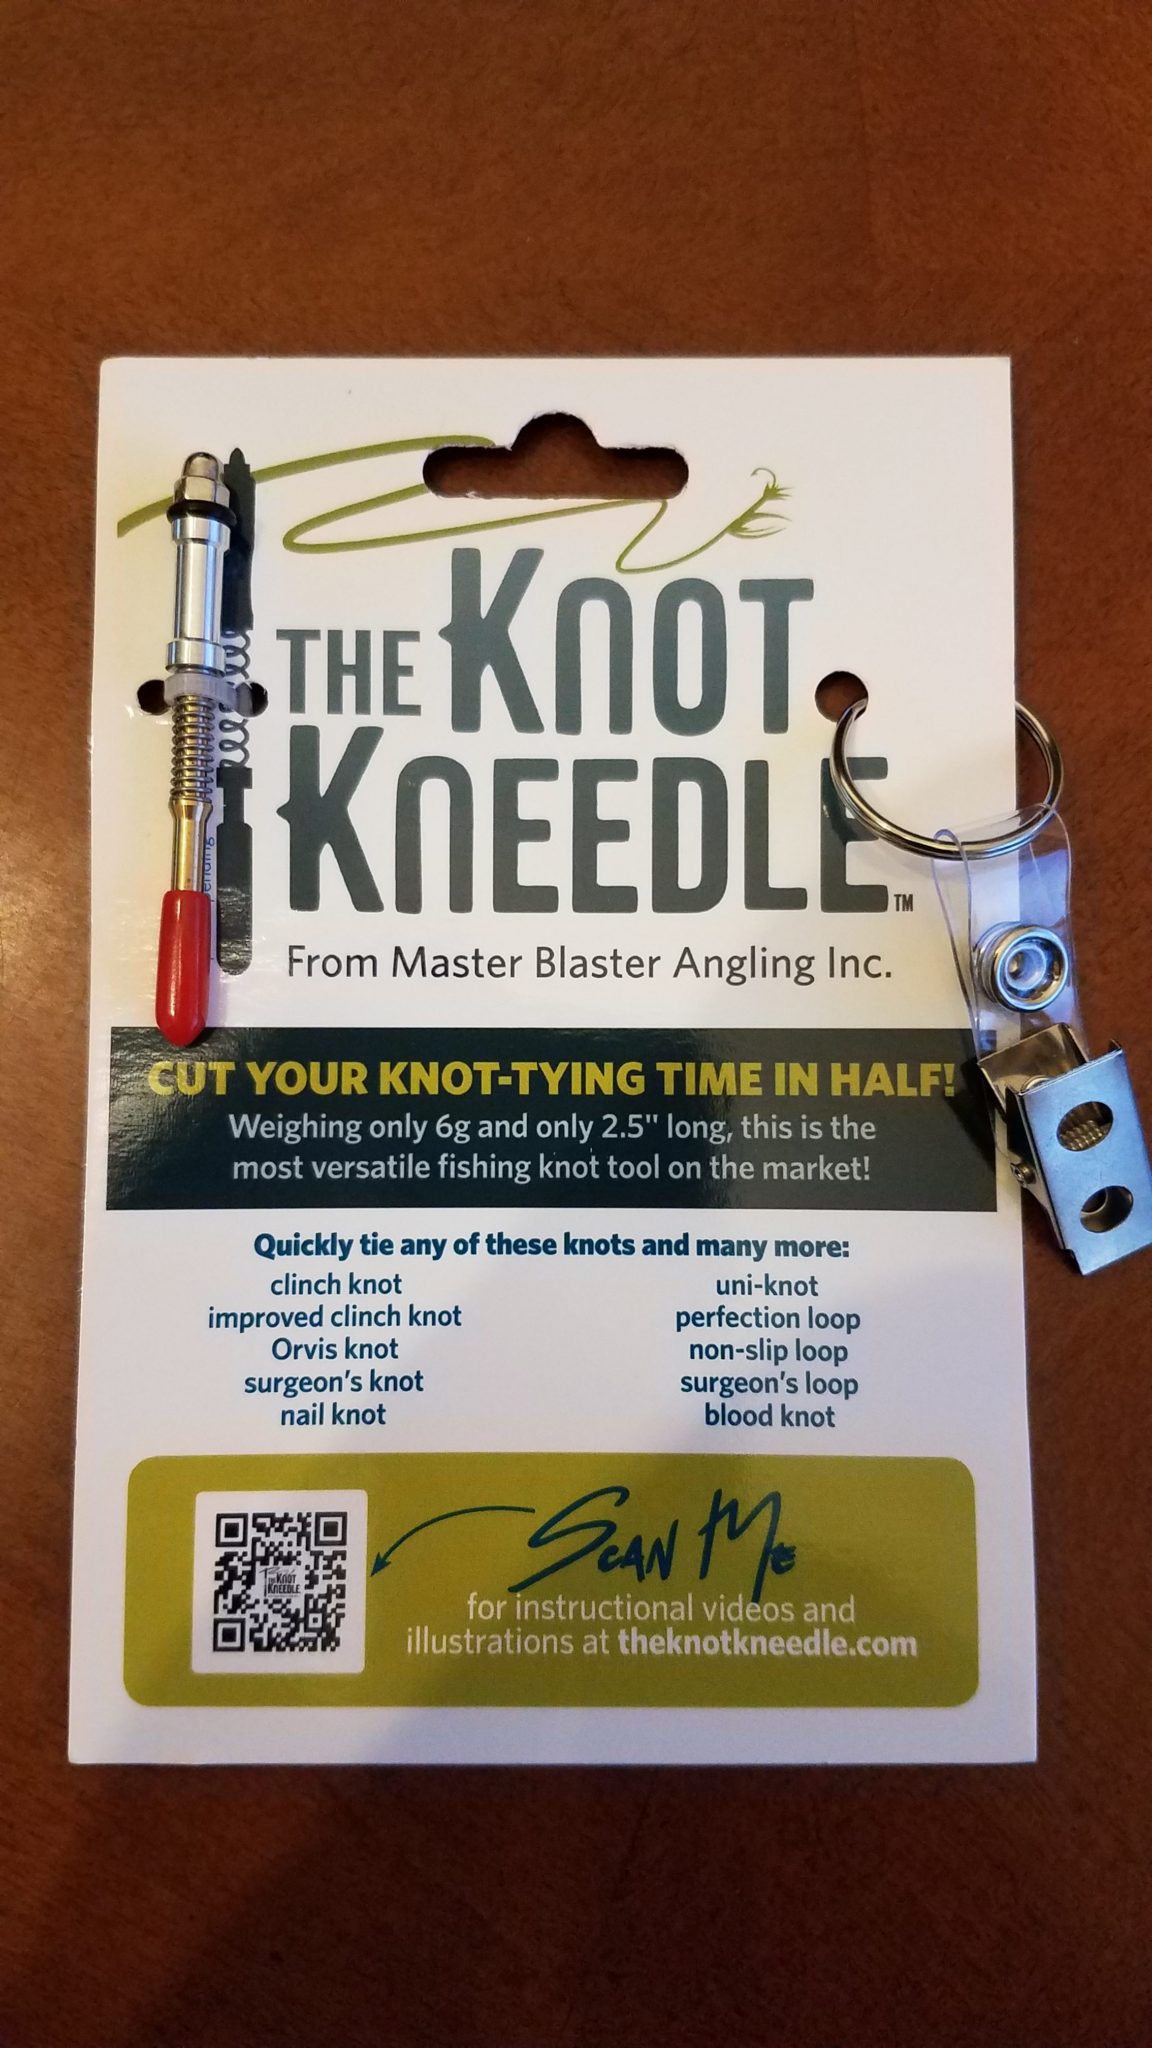 The Knot Kneedle™ – Cutbow Fishing Gear